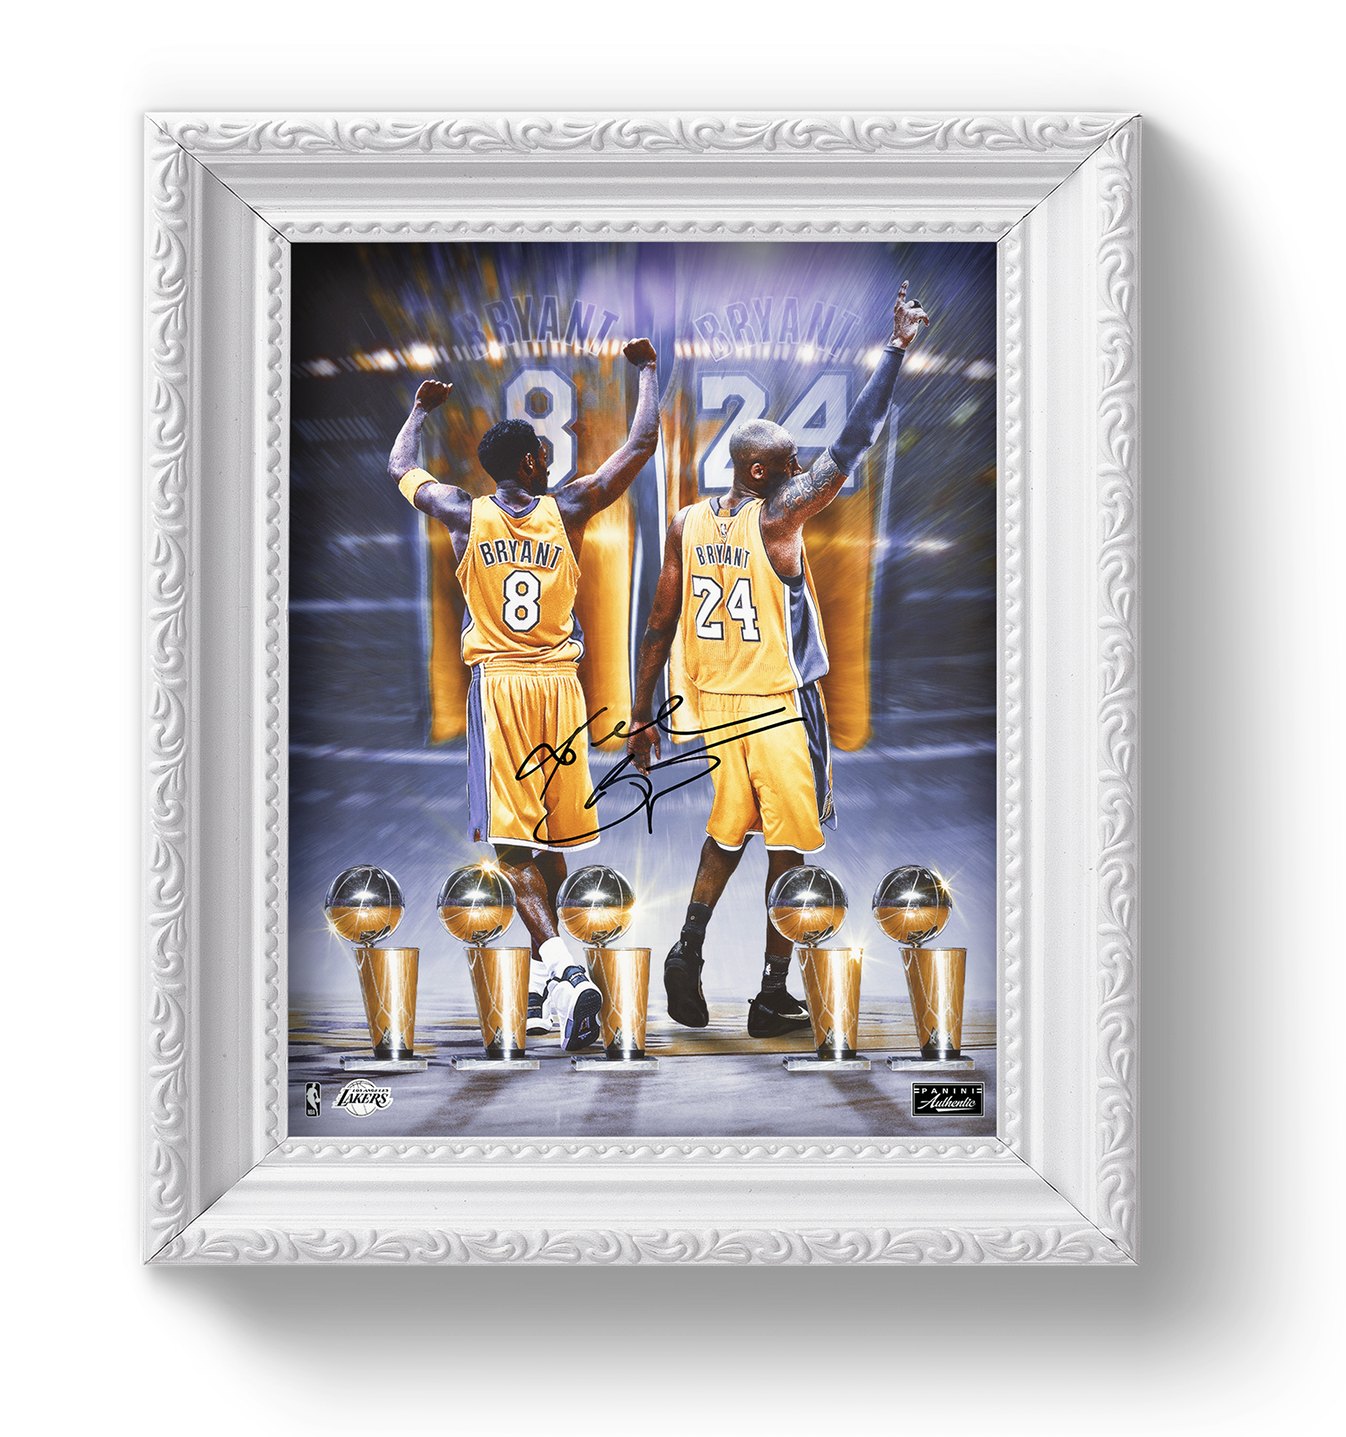 A Framed Photo Of Basketball Players Holding Trophies